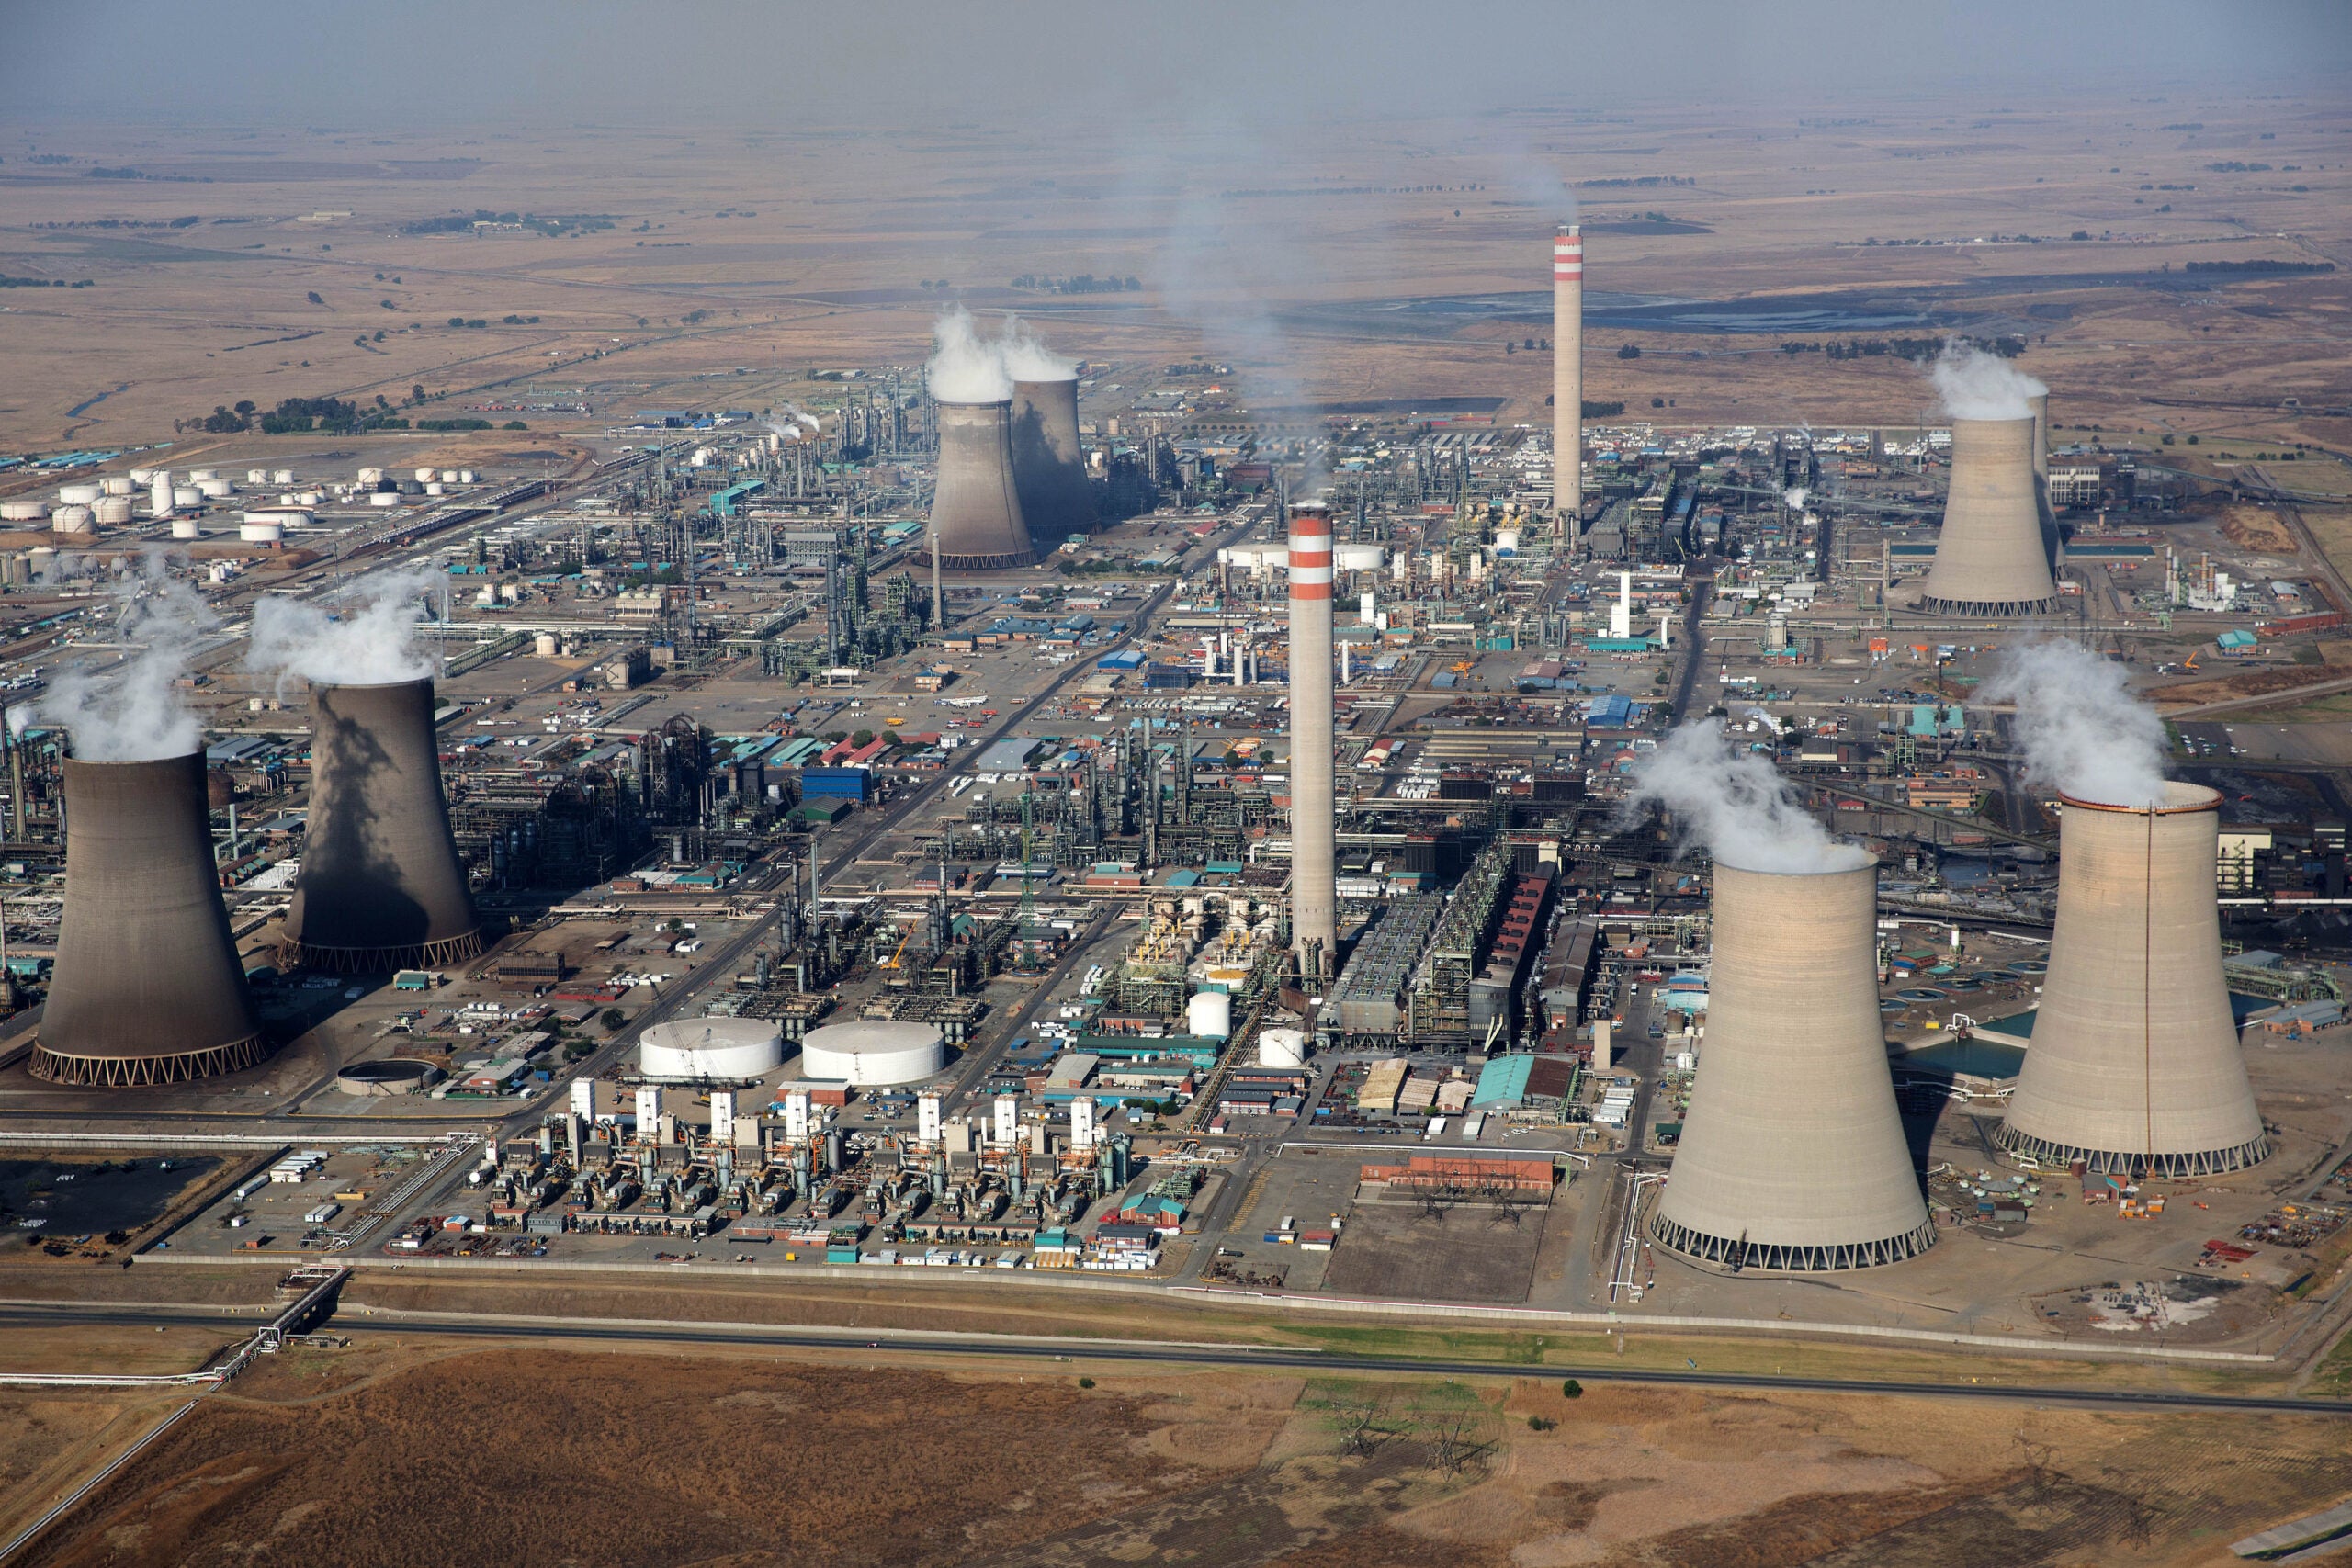 An aerial view of Secunda Power Station, one of the coal-fired plants that pollutes the air and water in South Africa&#039;s Mpumalanga province.